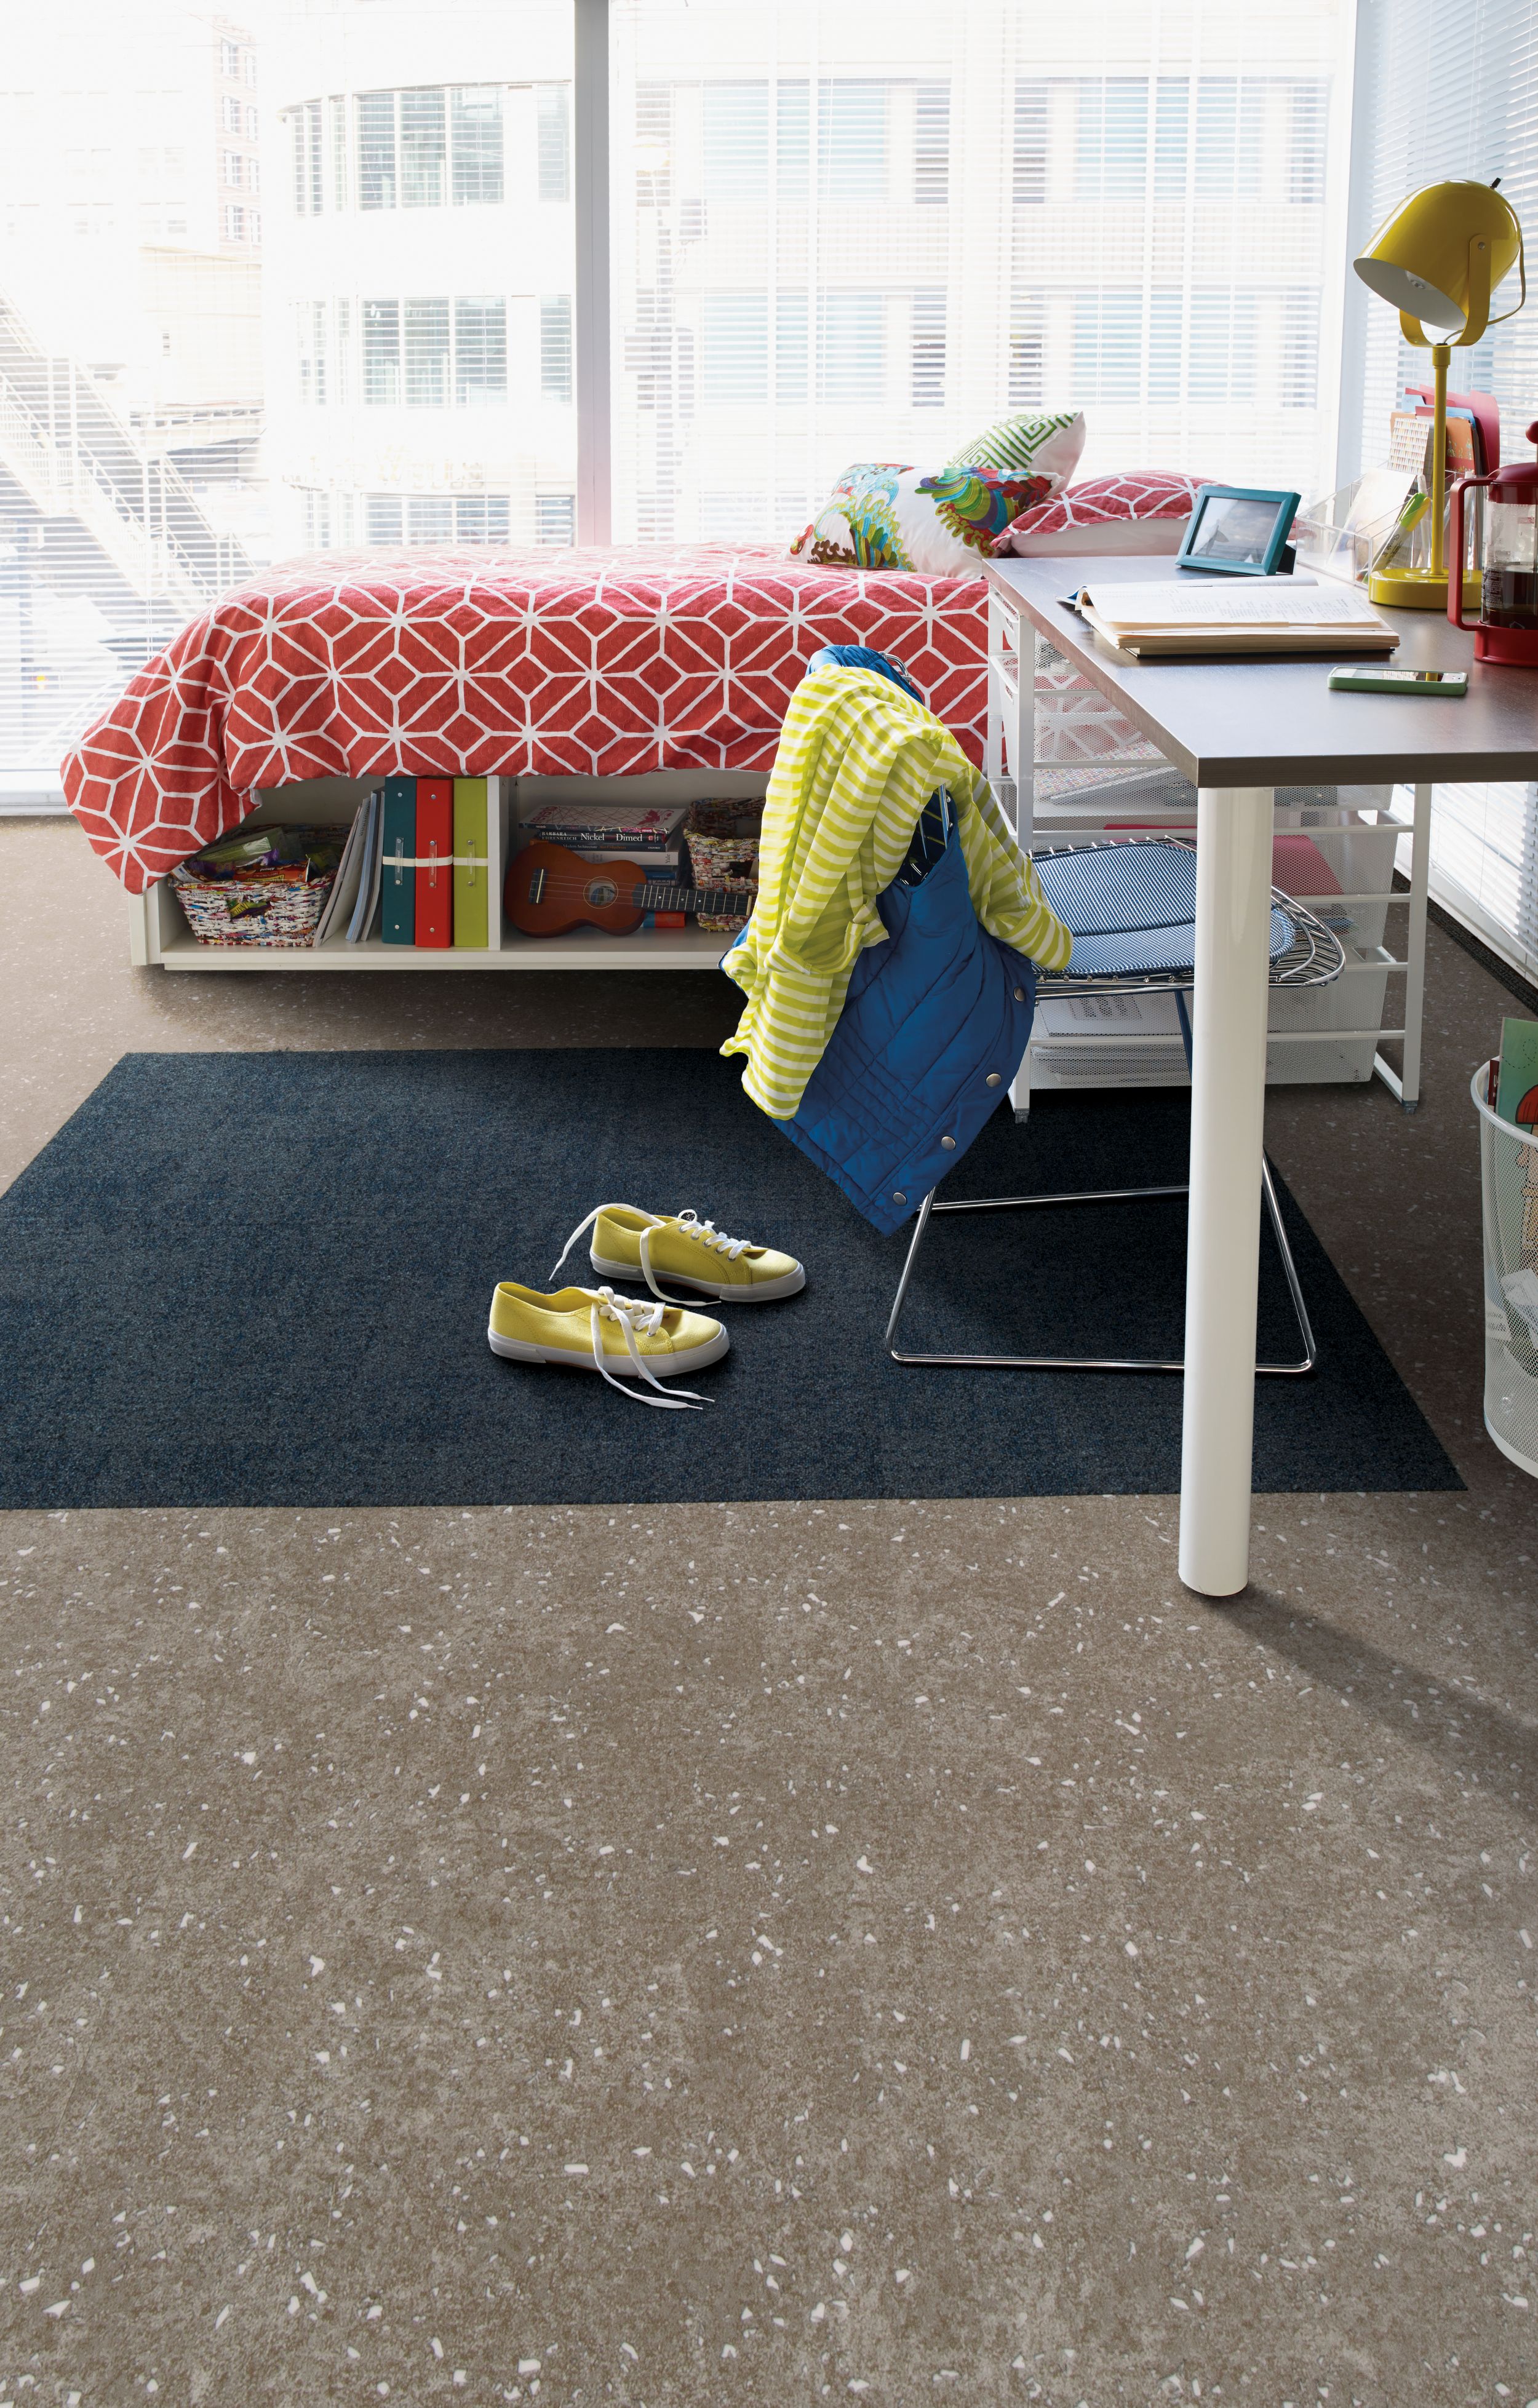 Interface Step in Time carpet tile and Walk the Aisle LVT in a dorm room Bildnummer 6